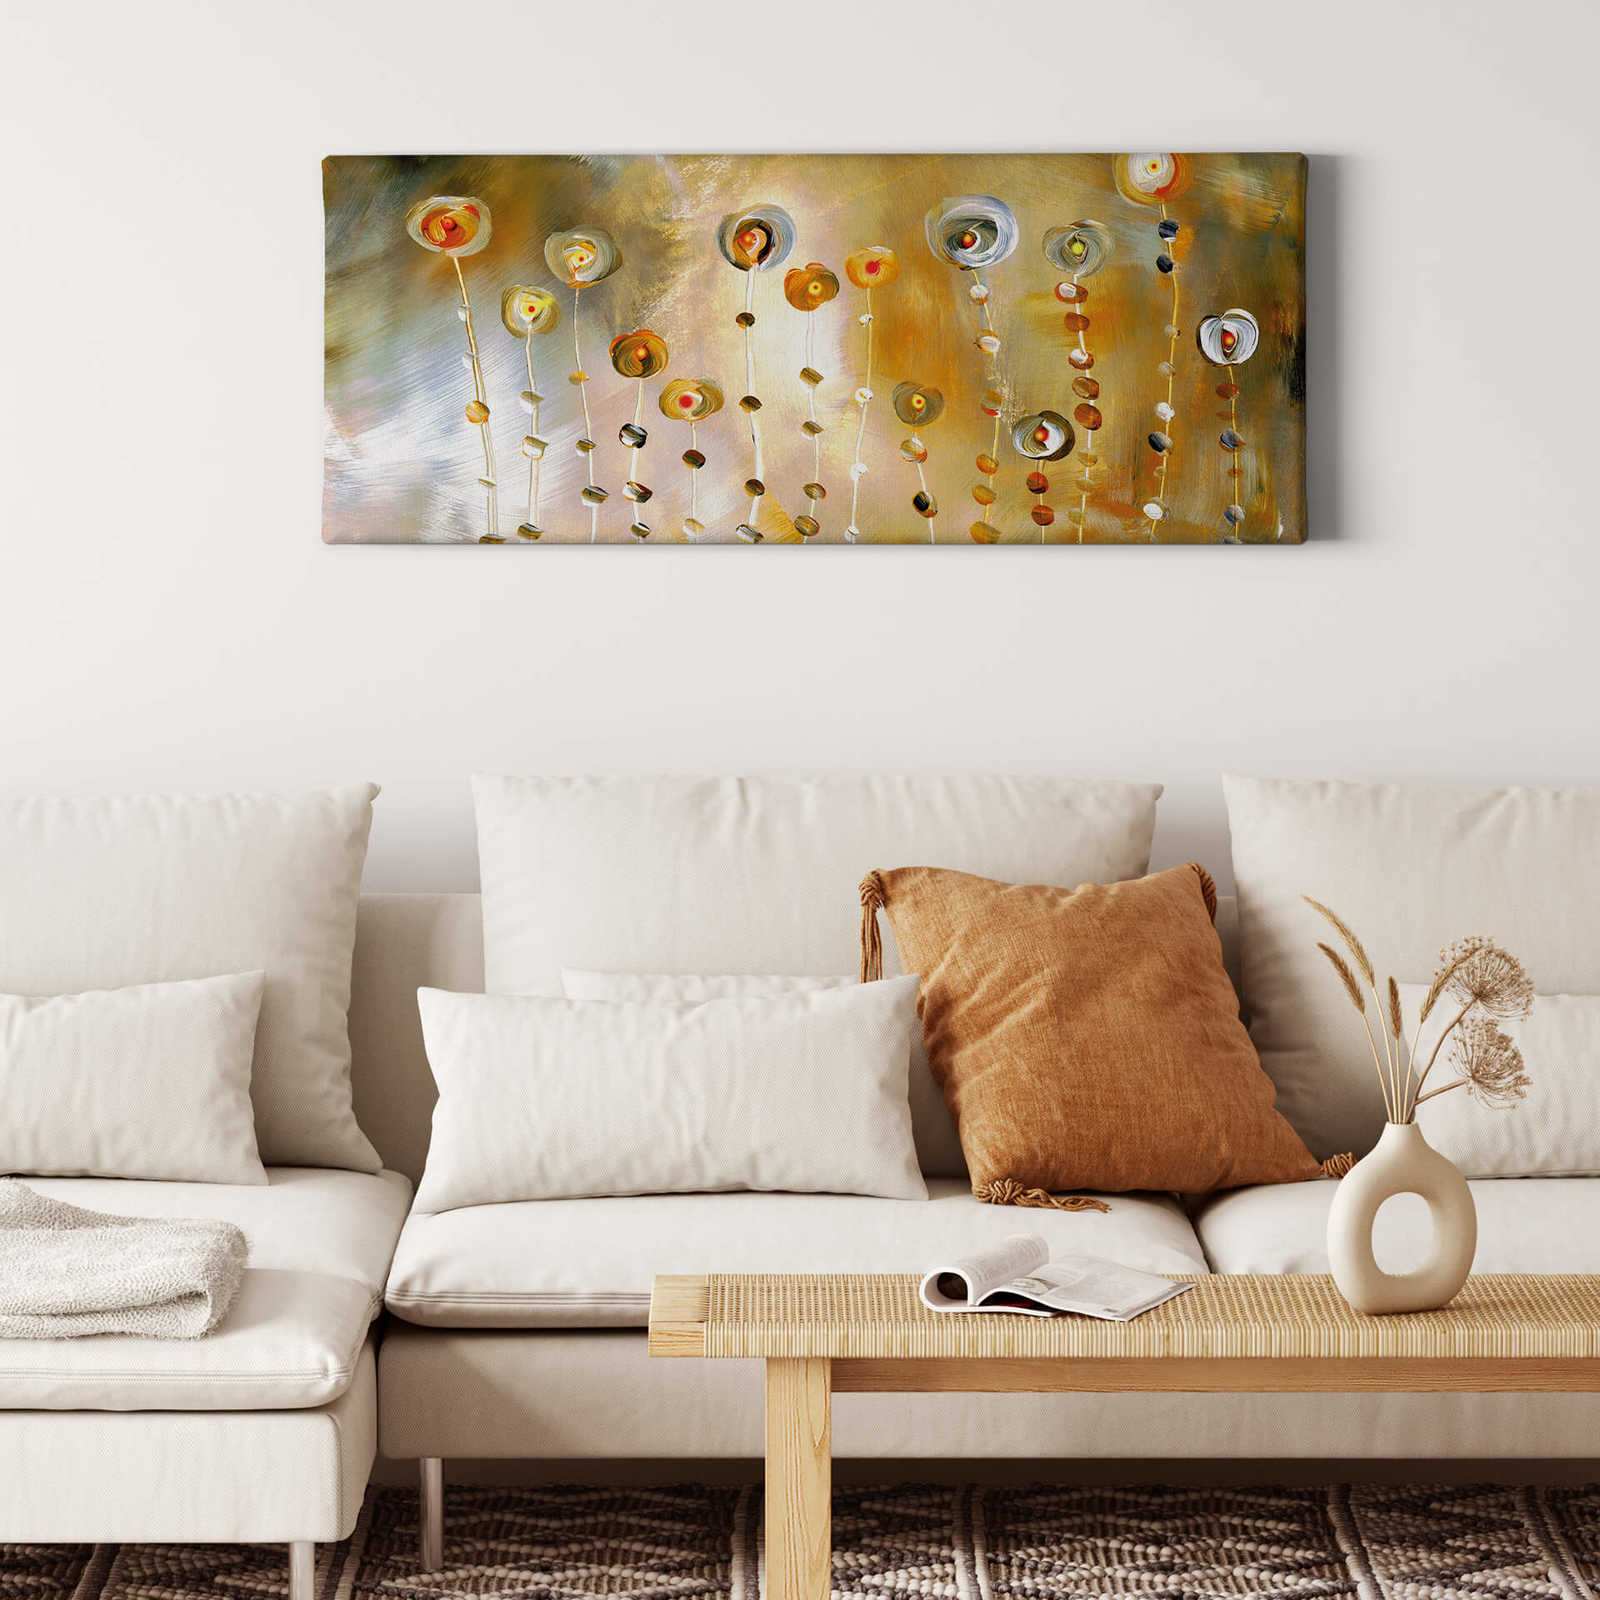             Panorama canvas print abstract flowers by Kiksic
        